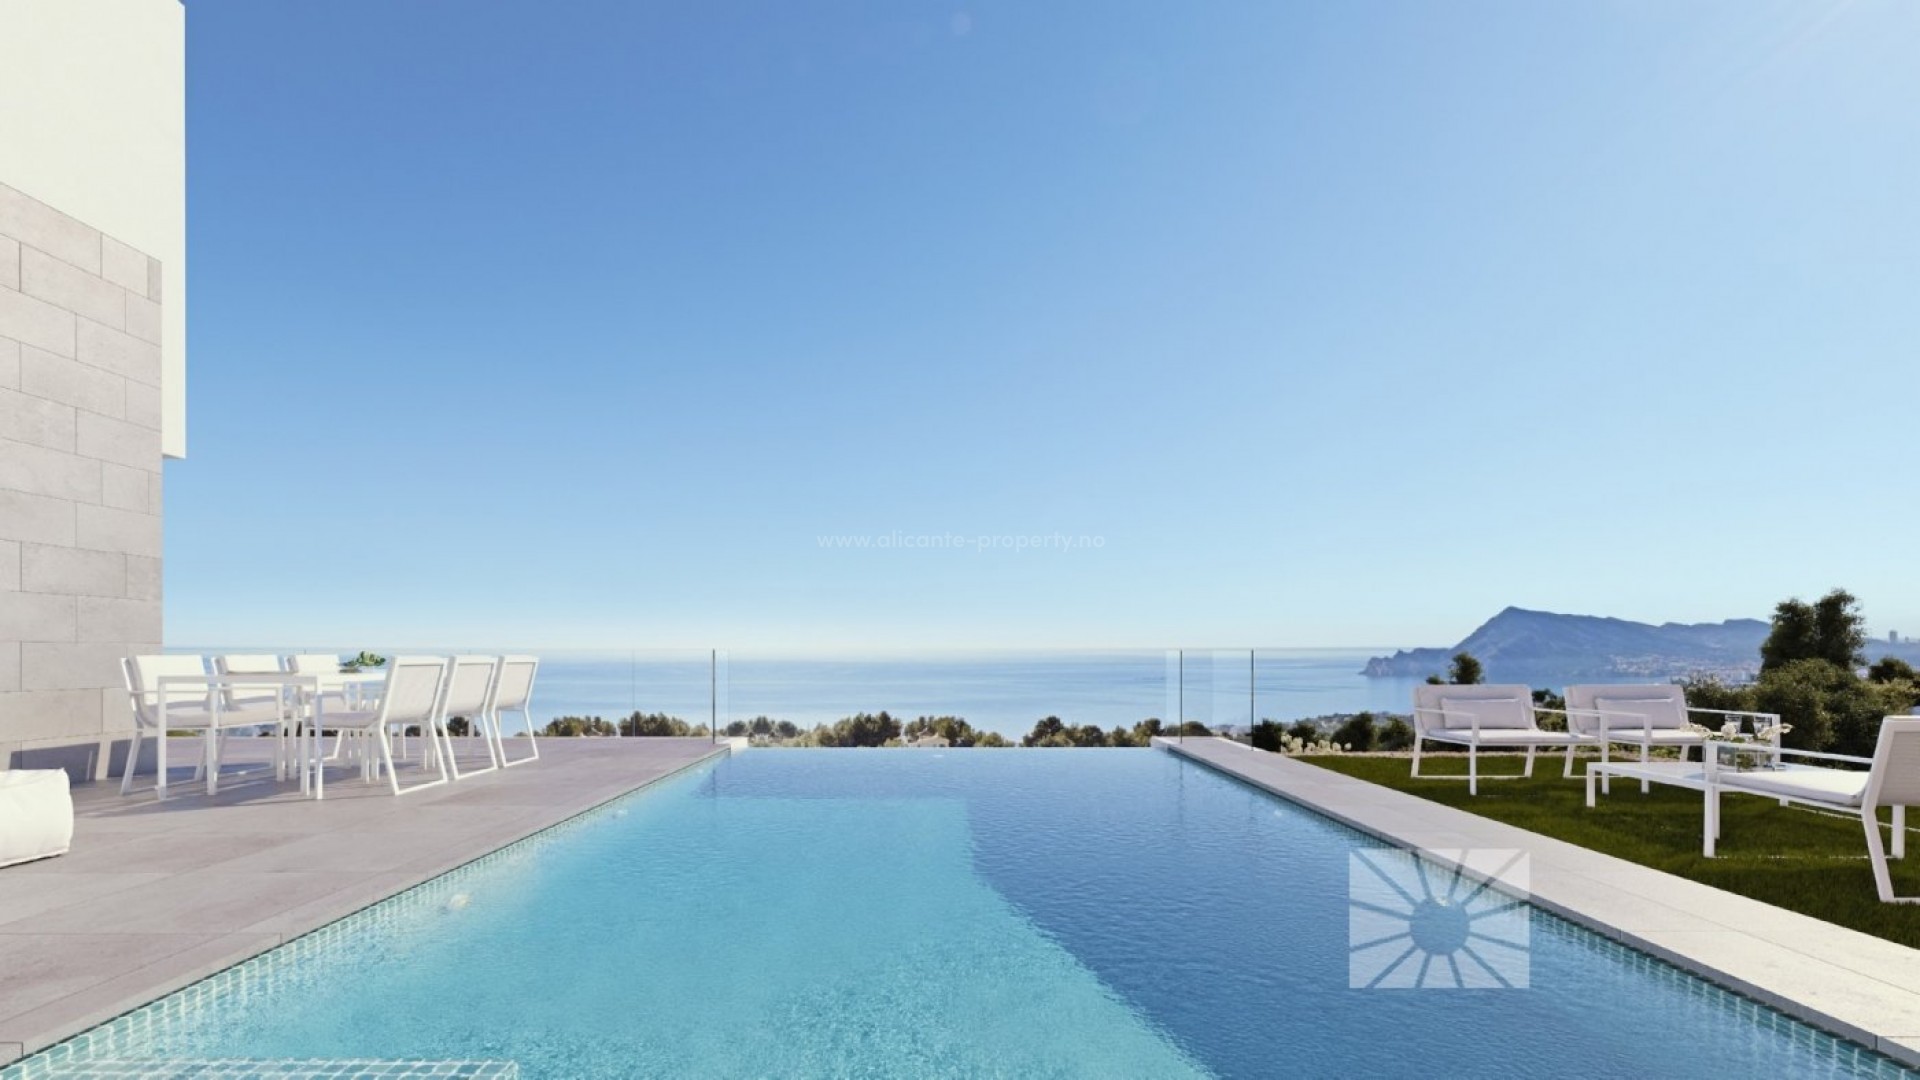 Impressive luxury villa in Sierra de Altea with sea views, 4 bedrooms, 6 bathrooms, with large swimming pool, terraces and veranda. The villa is equipped with a lift.